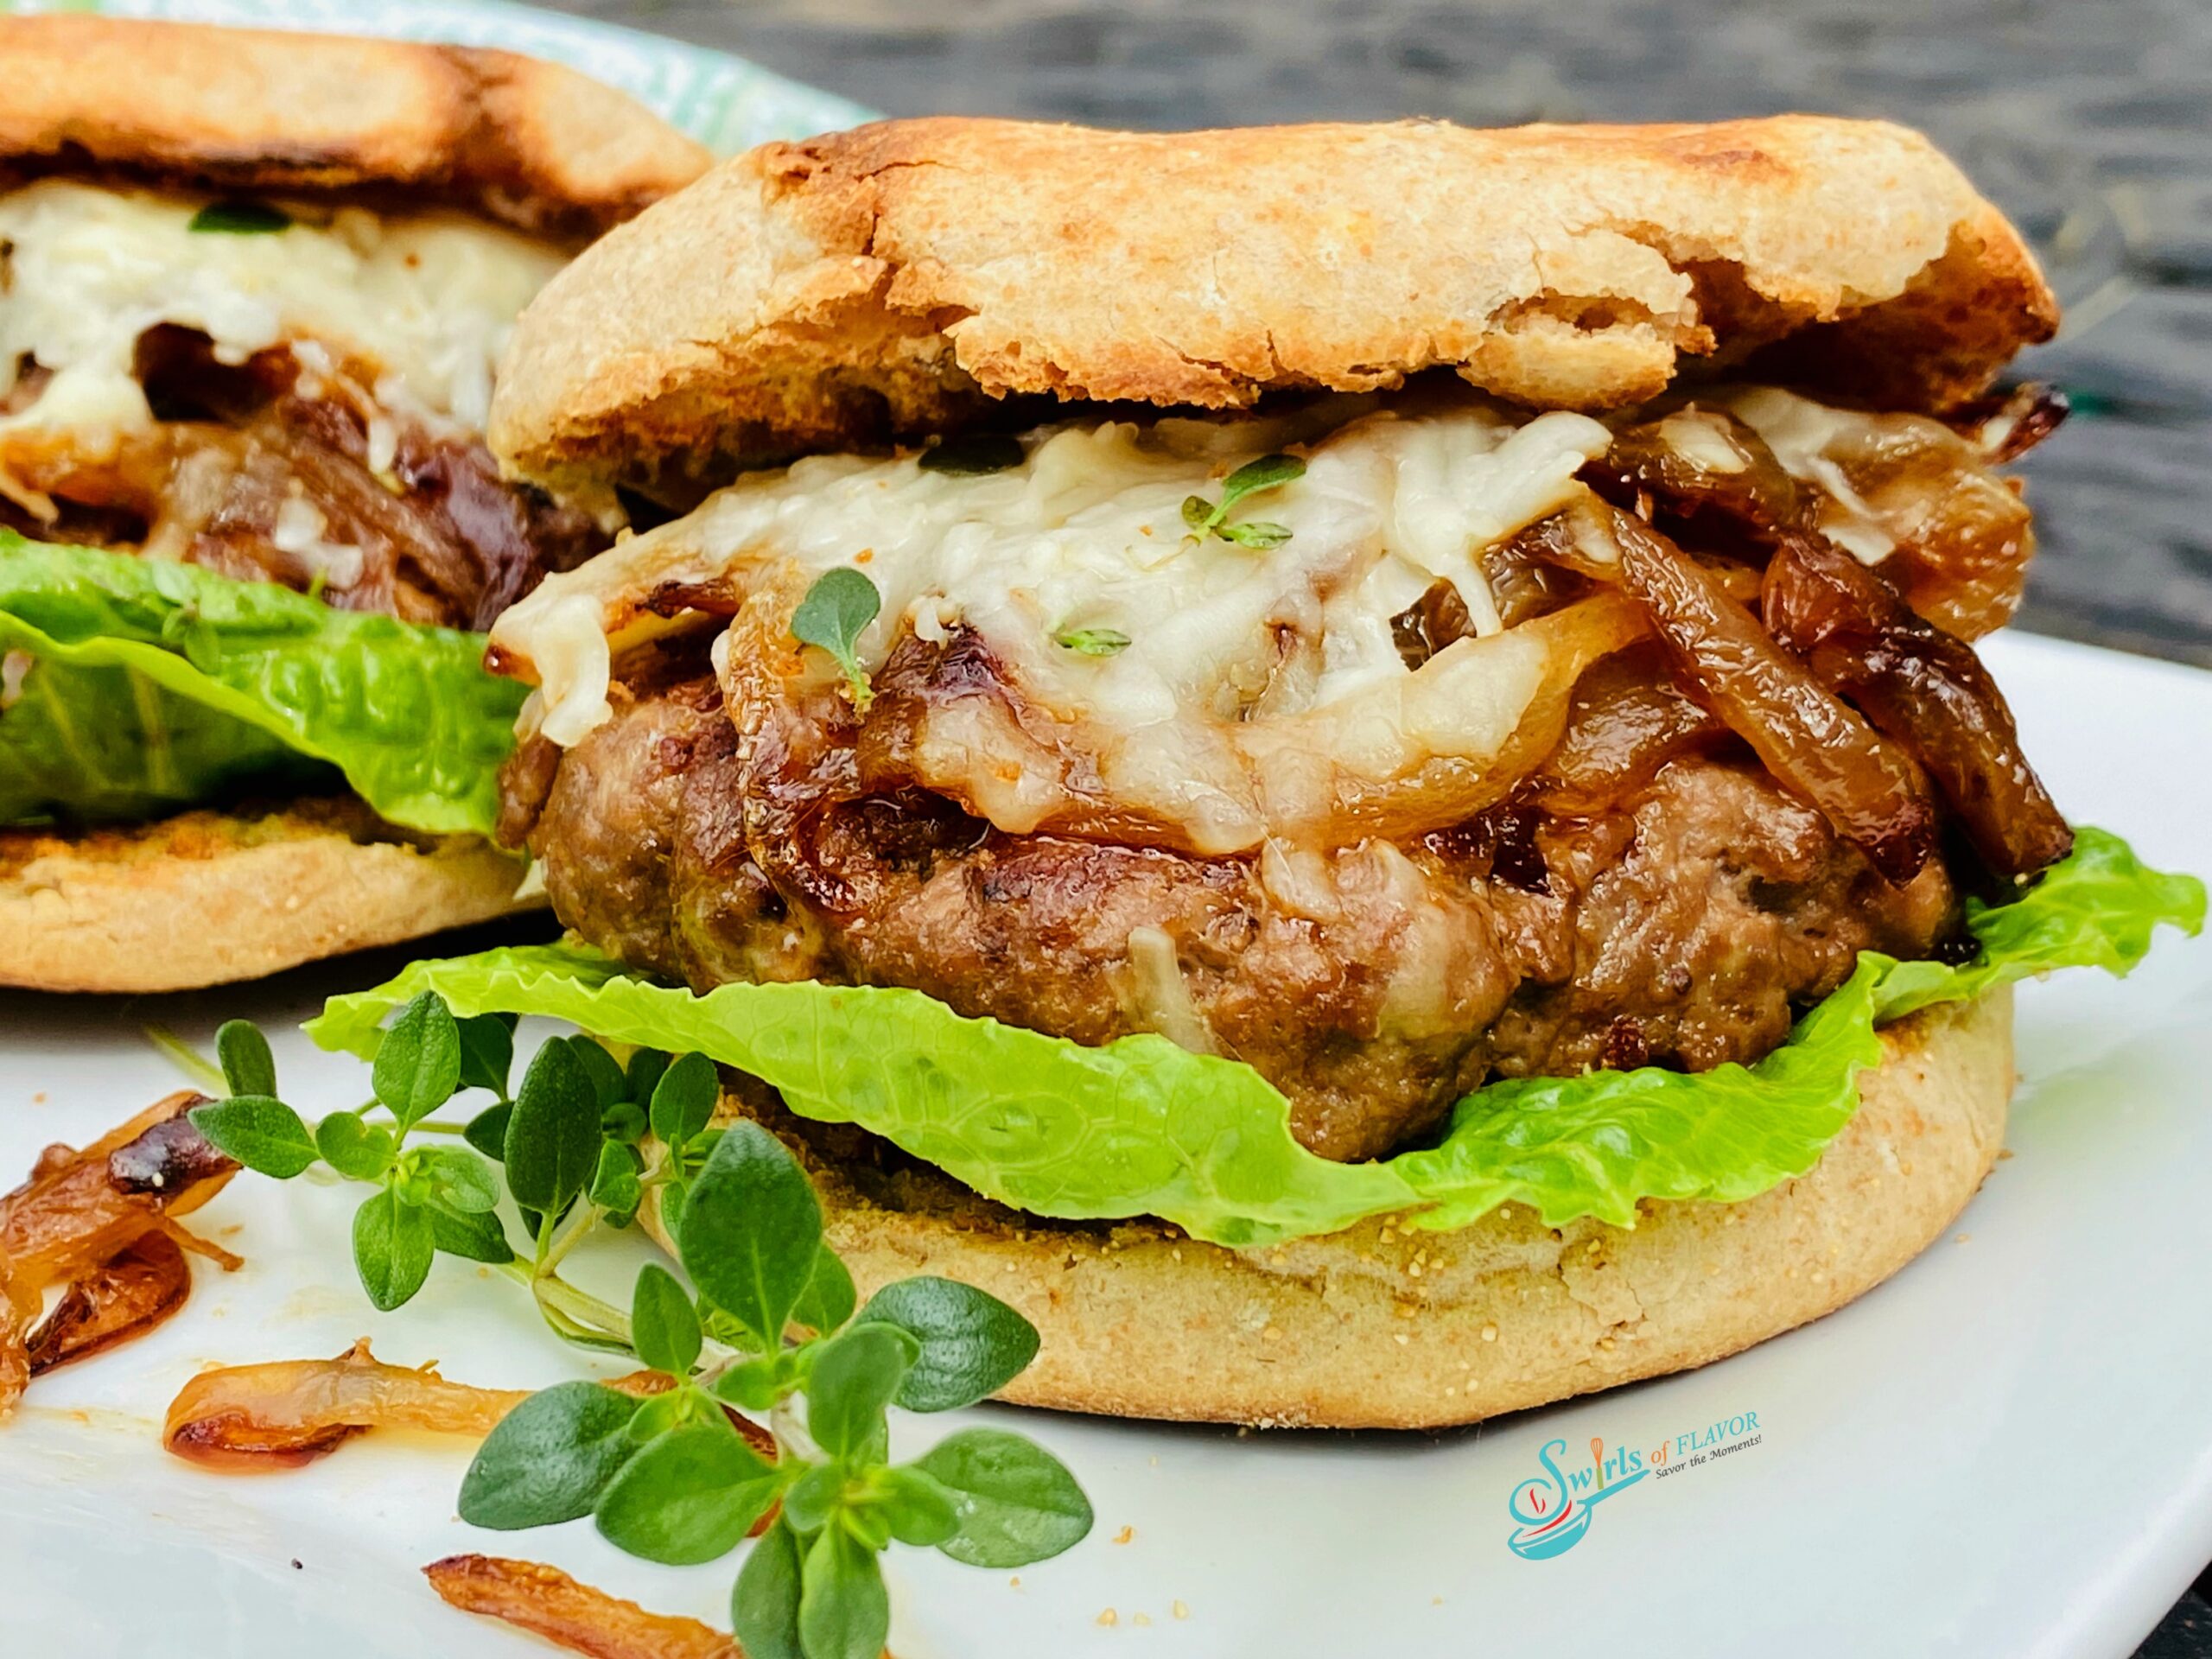 French Onion Soup Burger on an english muffin with lettuce and sprig of fresh thyme on a white plate